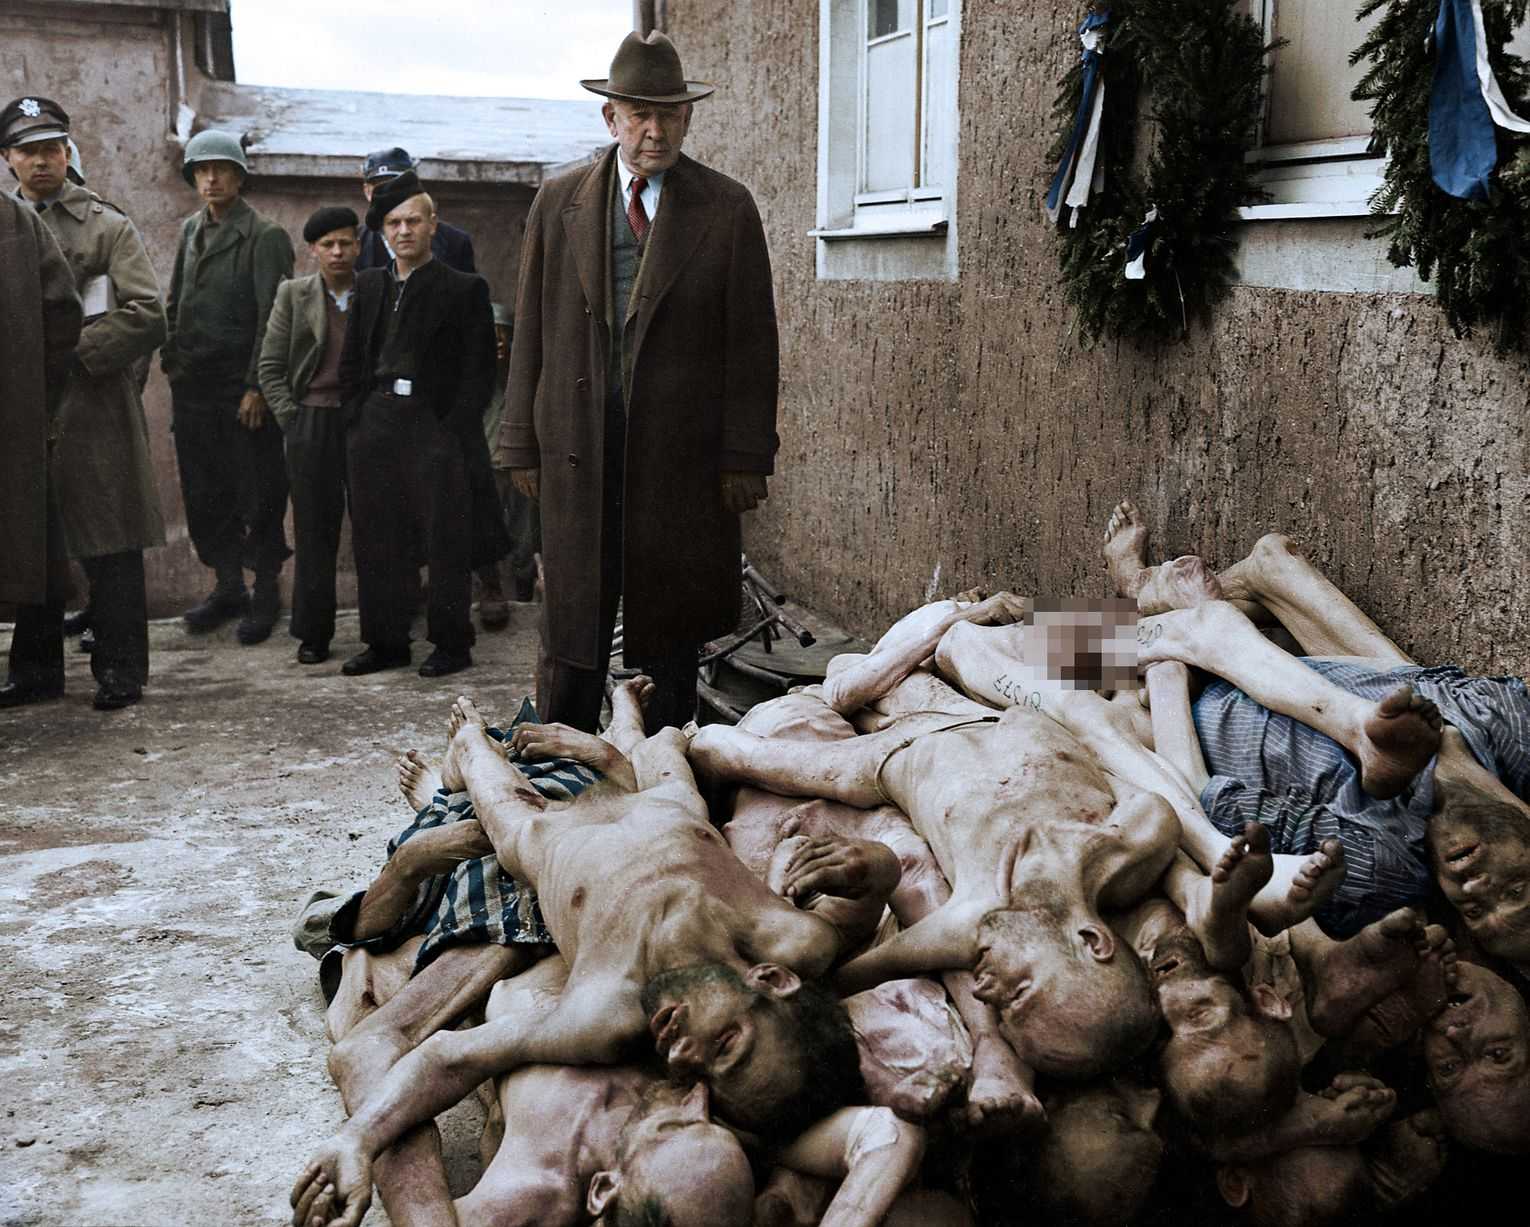 People of Weimar forced to see the results of Buchenwald